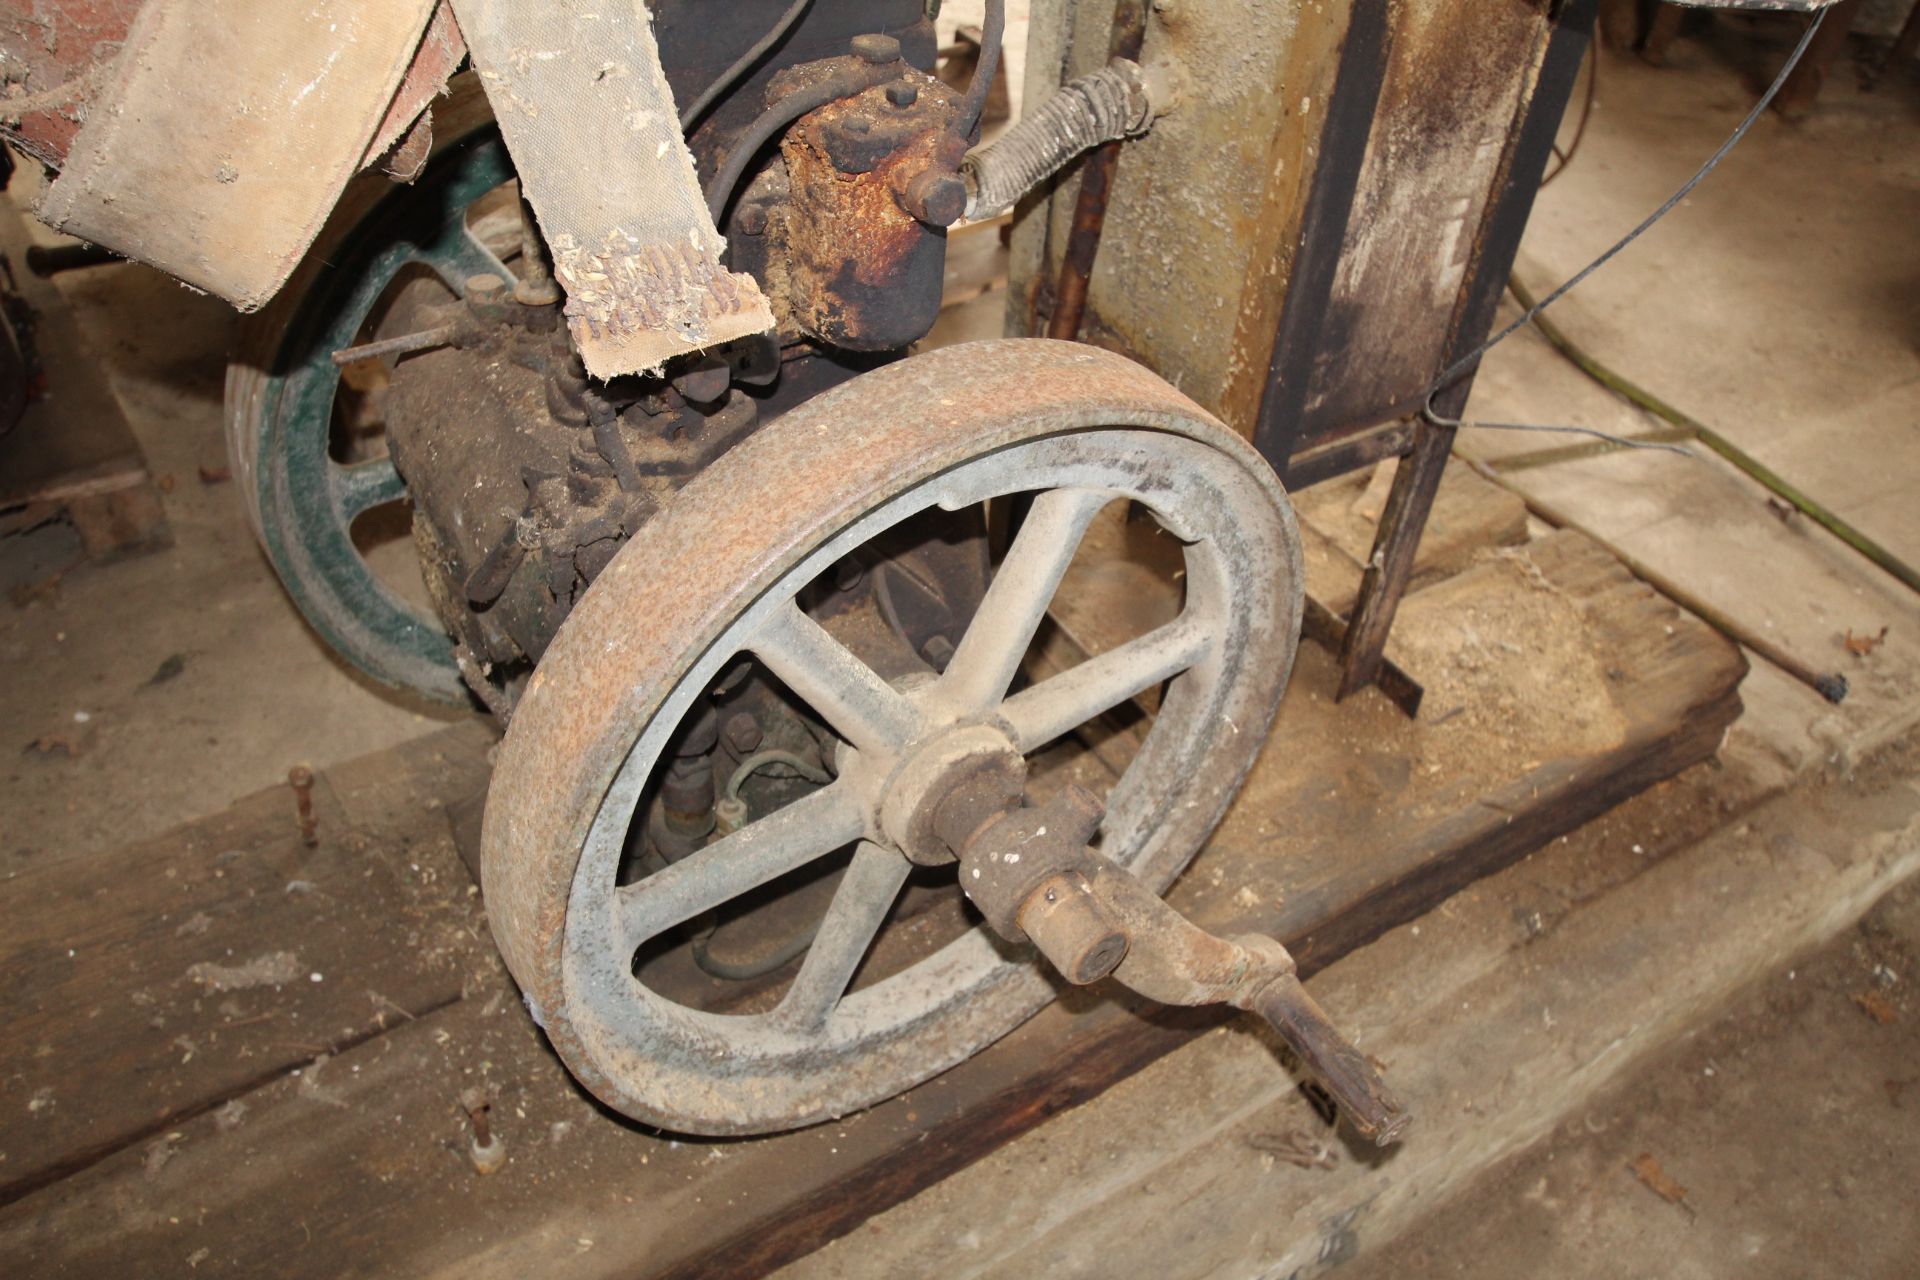 R A Lister & Co stationary engine. Owned from new. To be sold in situ and removed at purchaser’s - Image 5 of 7